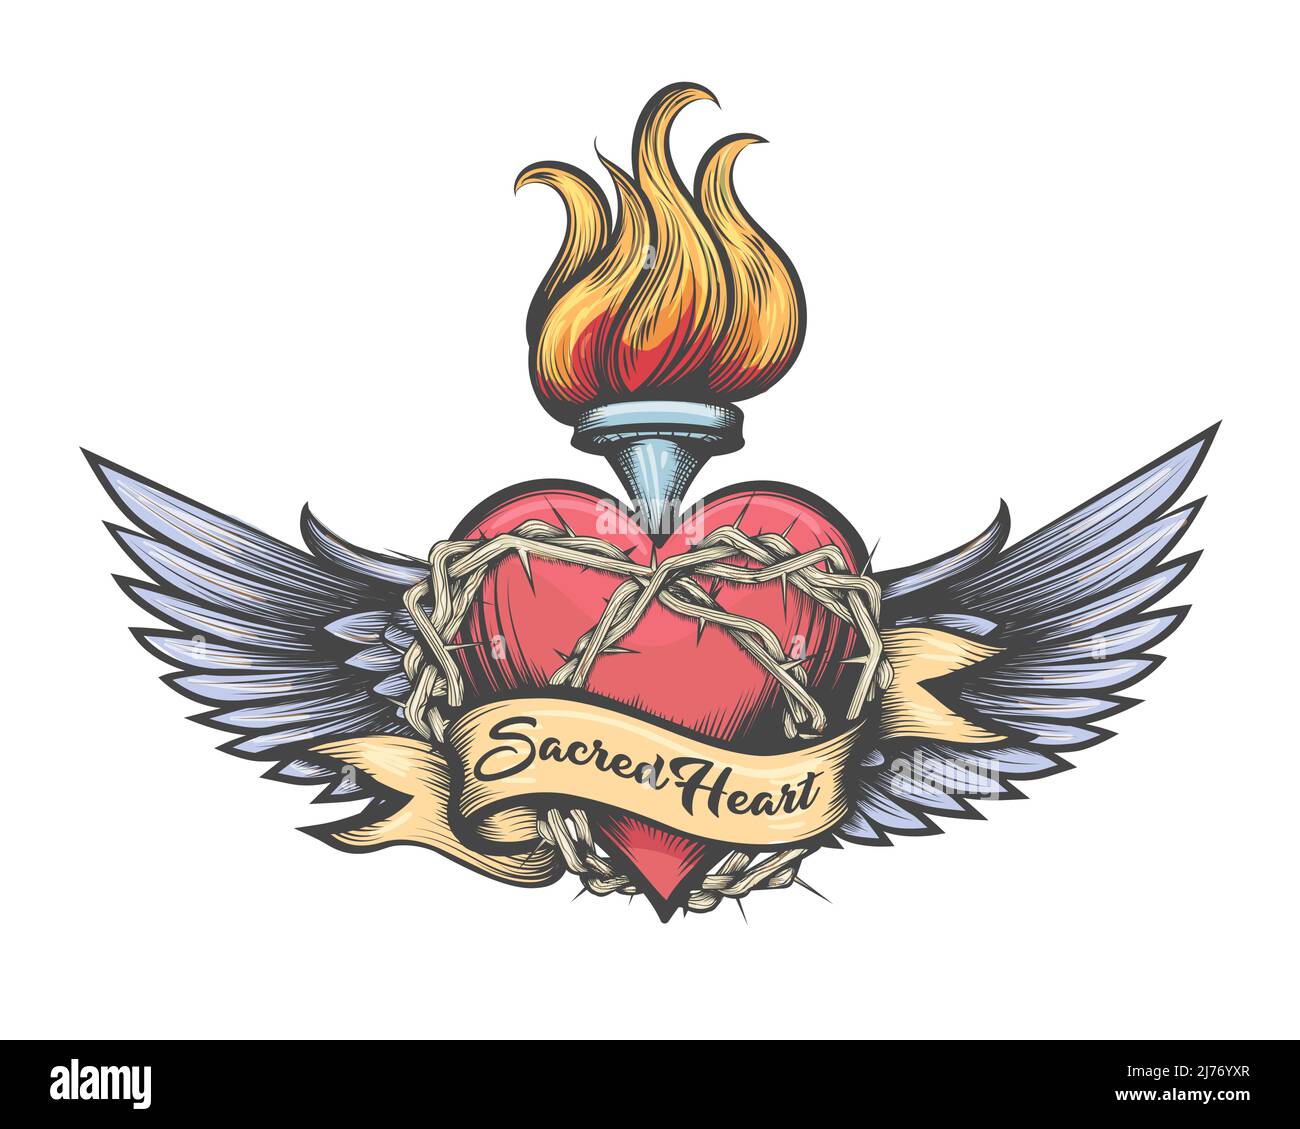 Tattoo of Winged Sacred Heart Tattoo drawn in Engraving Style isolated on white background. Vector illustration. Stock Vector